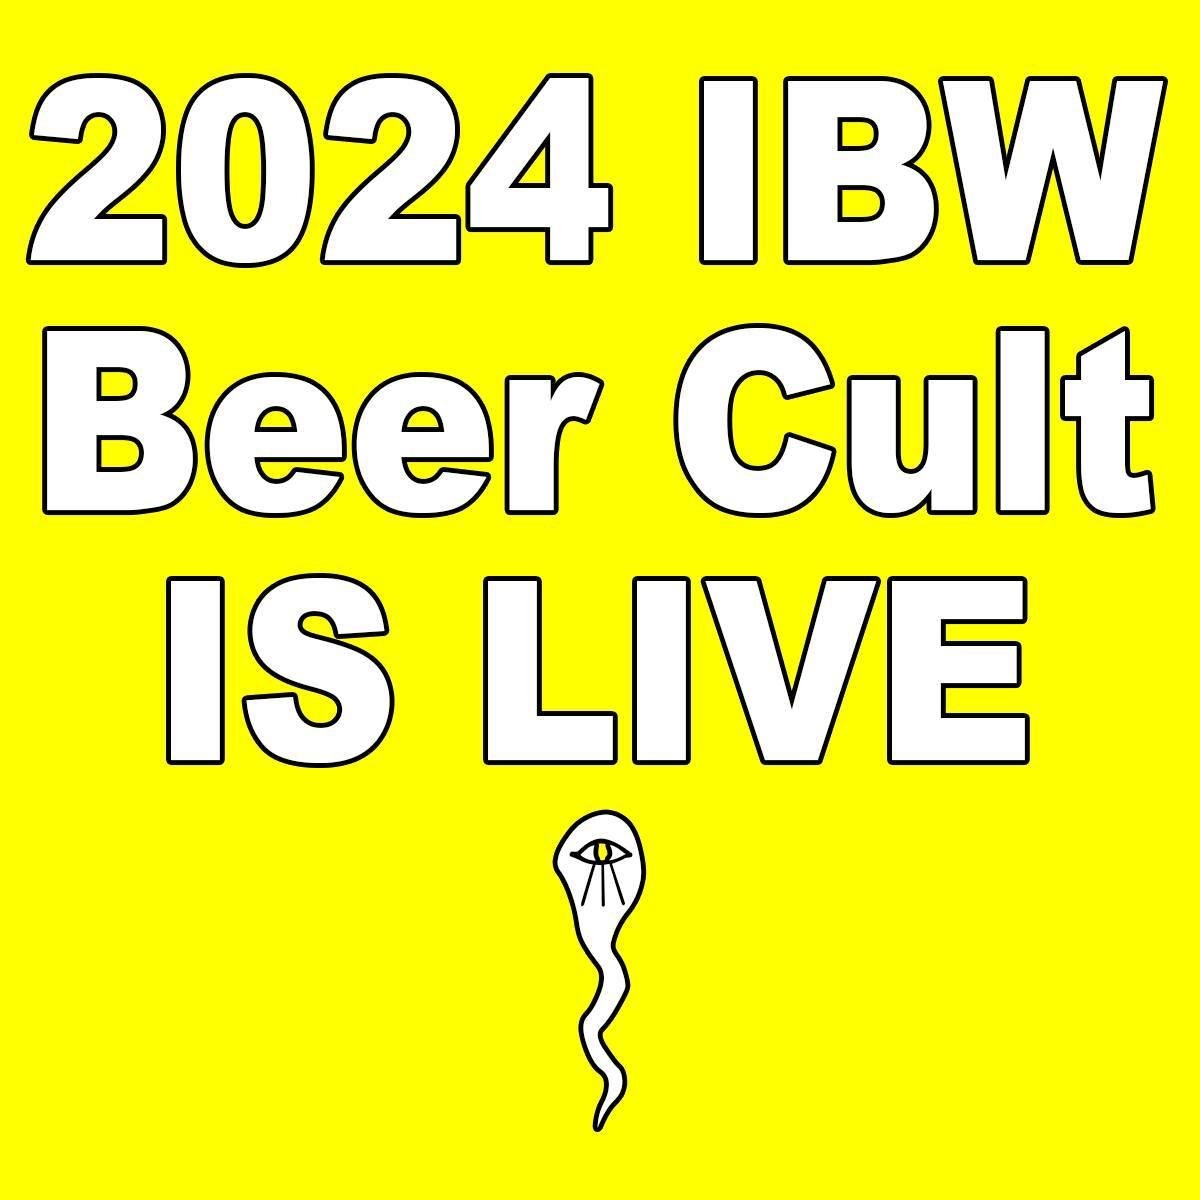 2024 IBW BEER CULT sign up ends on May 1st! May 1st will be the last day to sign up for the GREATEST BEER CULT OF ALL TIME!!

Swipe left to see some of the benefits for each level of membership.

Go here to purchase: https://www.ibw-chicago.com/cult-